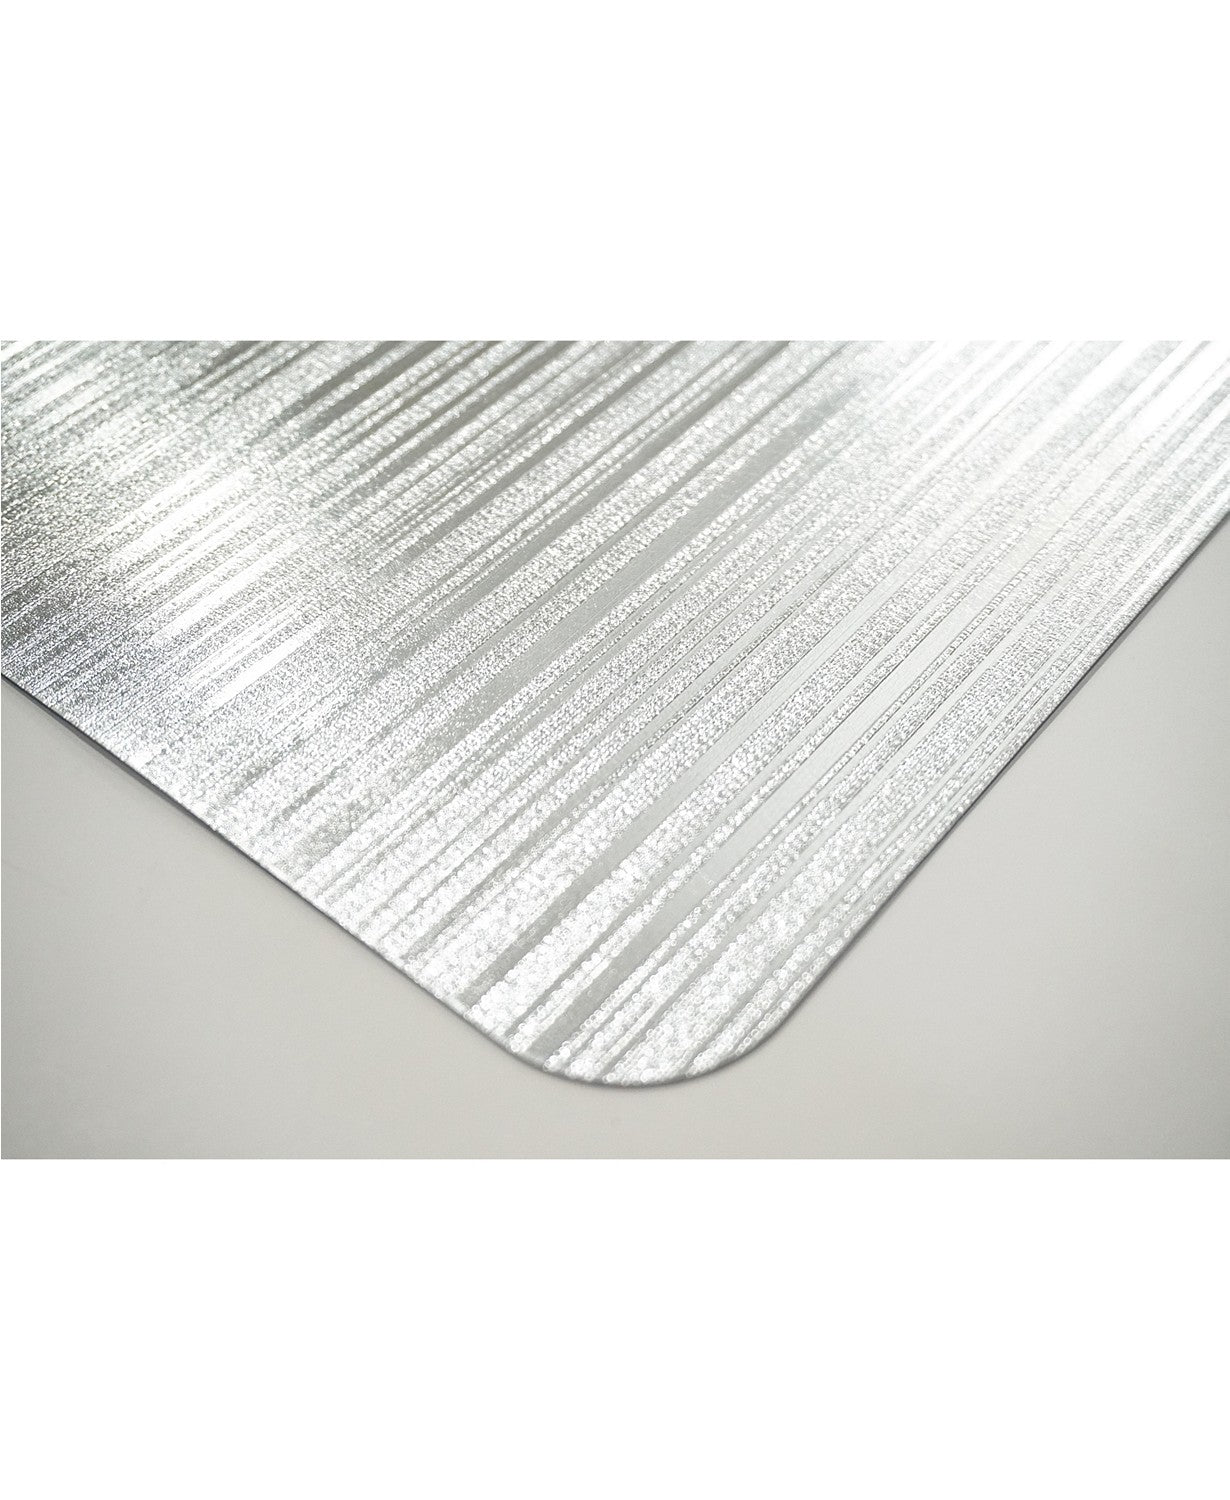 Dainty Home Reversible Emery Smooth Metallic Stripes 12" x 18" Placemats - Set of 4